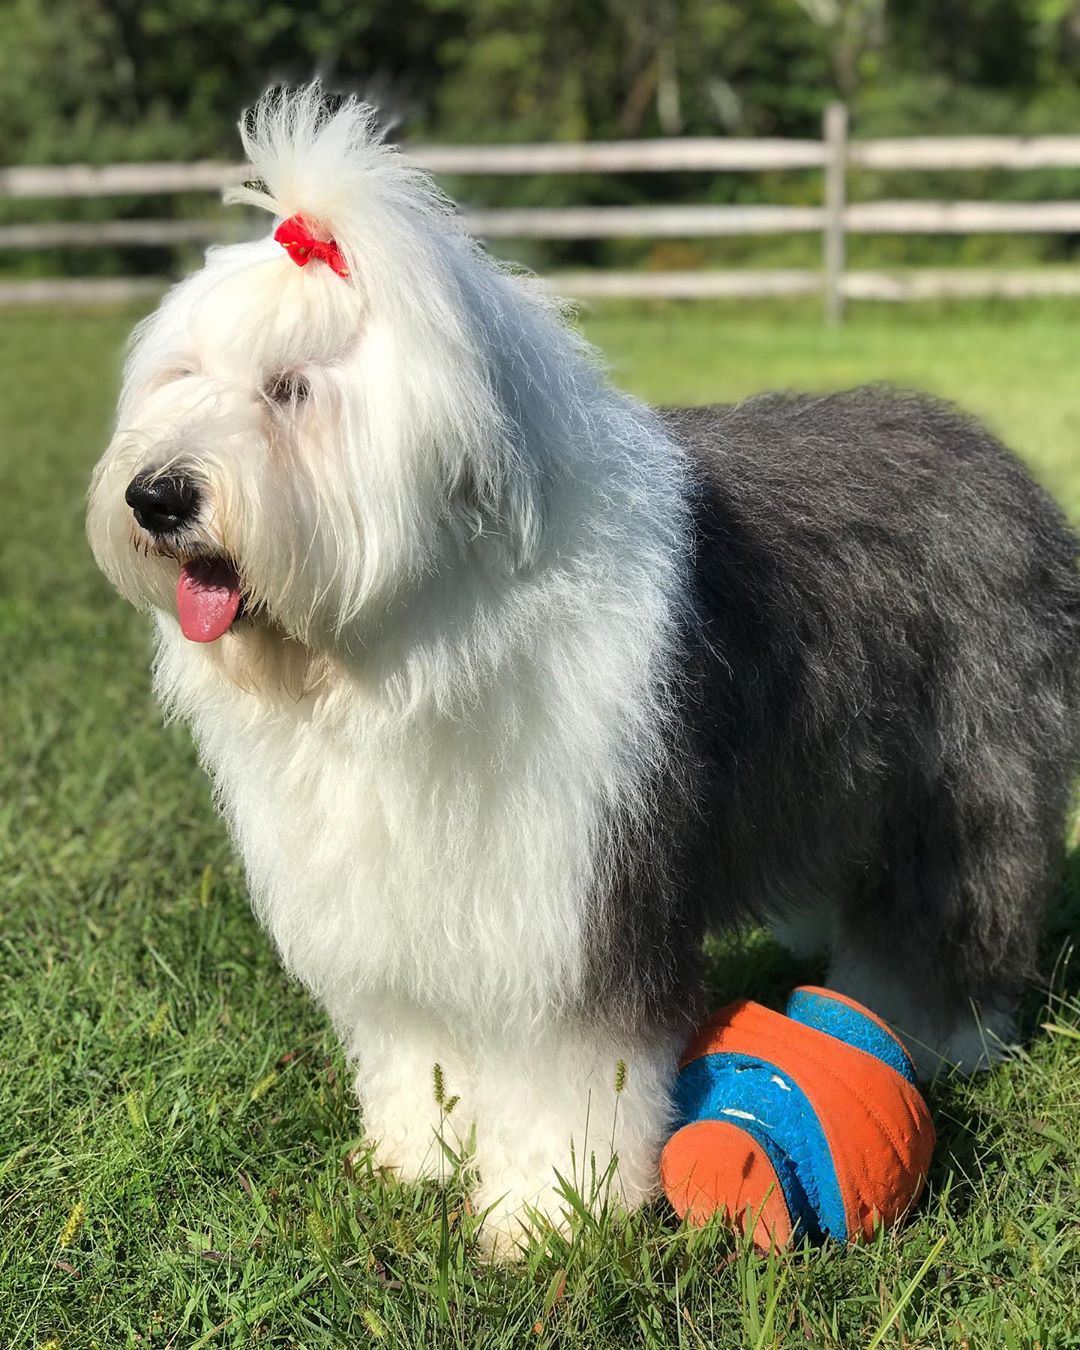 A Old English Sheepdog standing on the grass with its ball